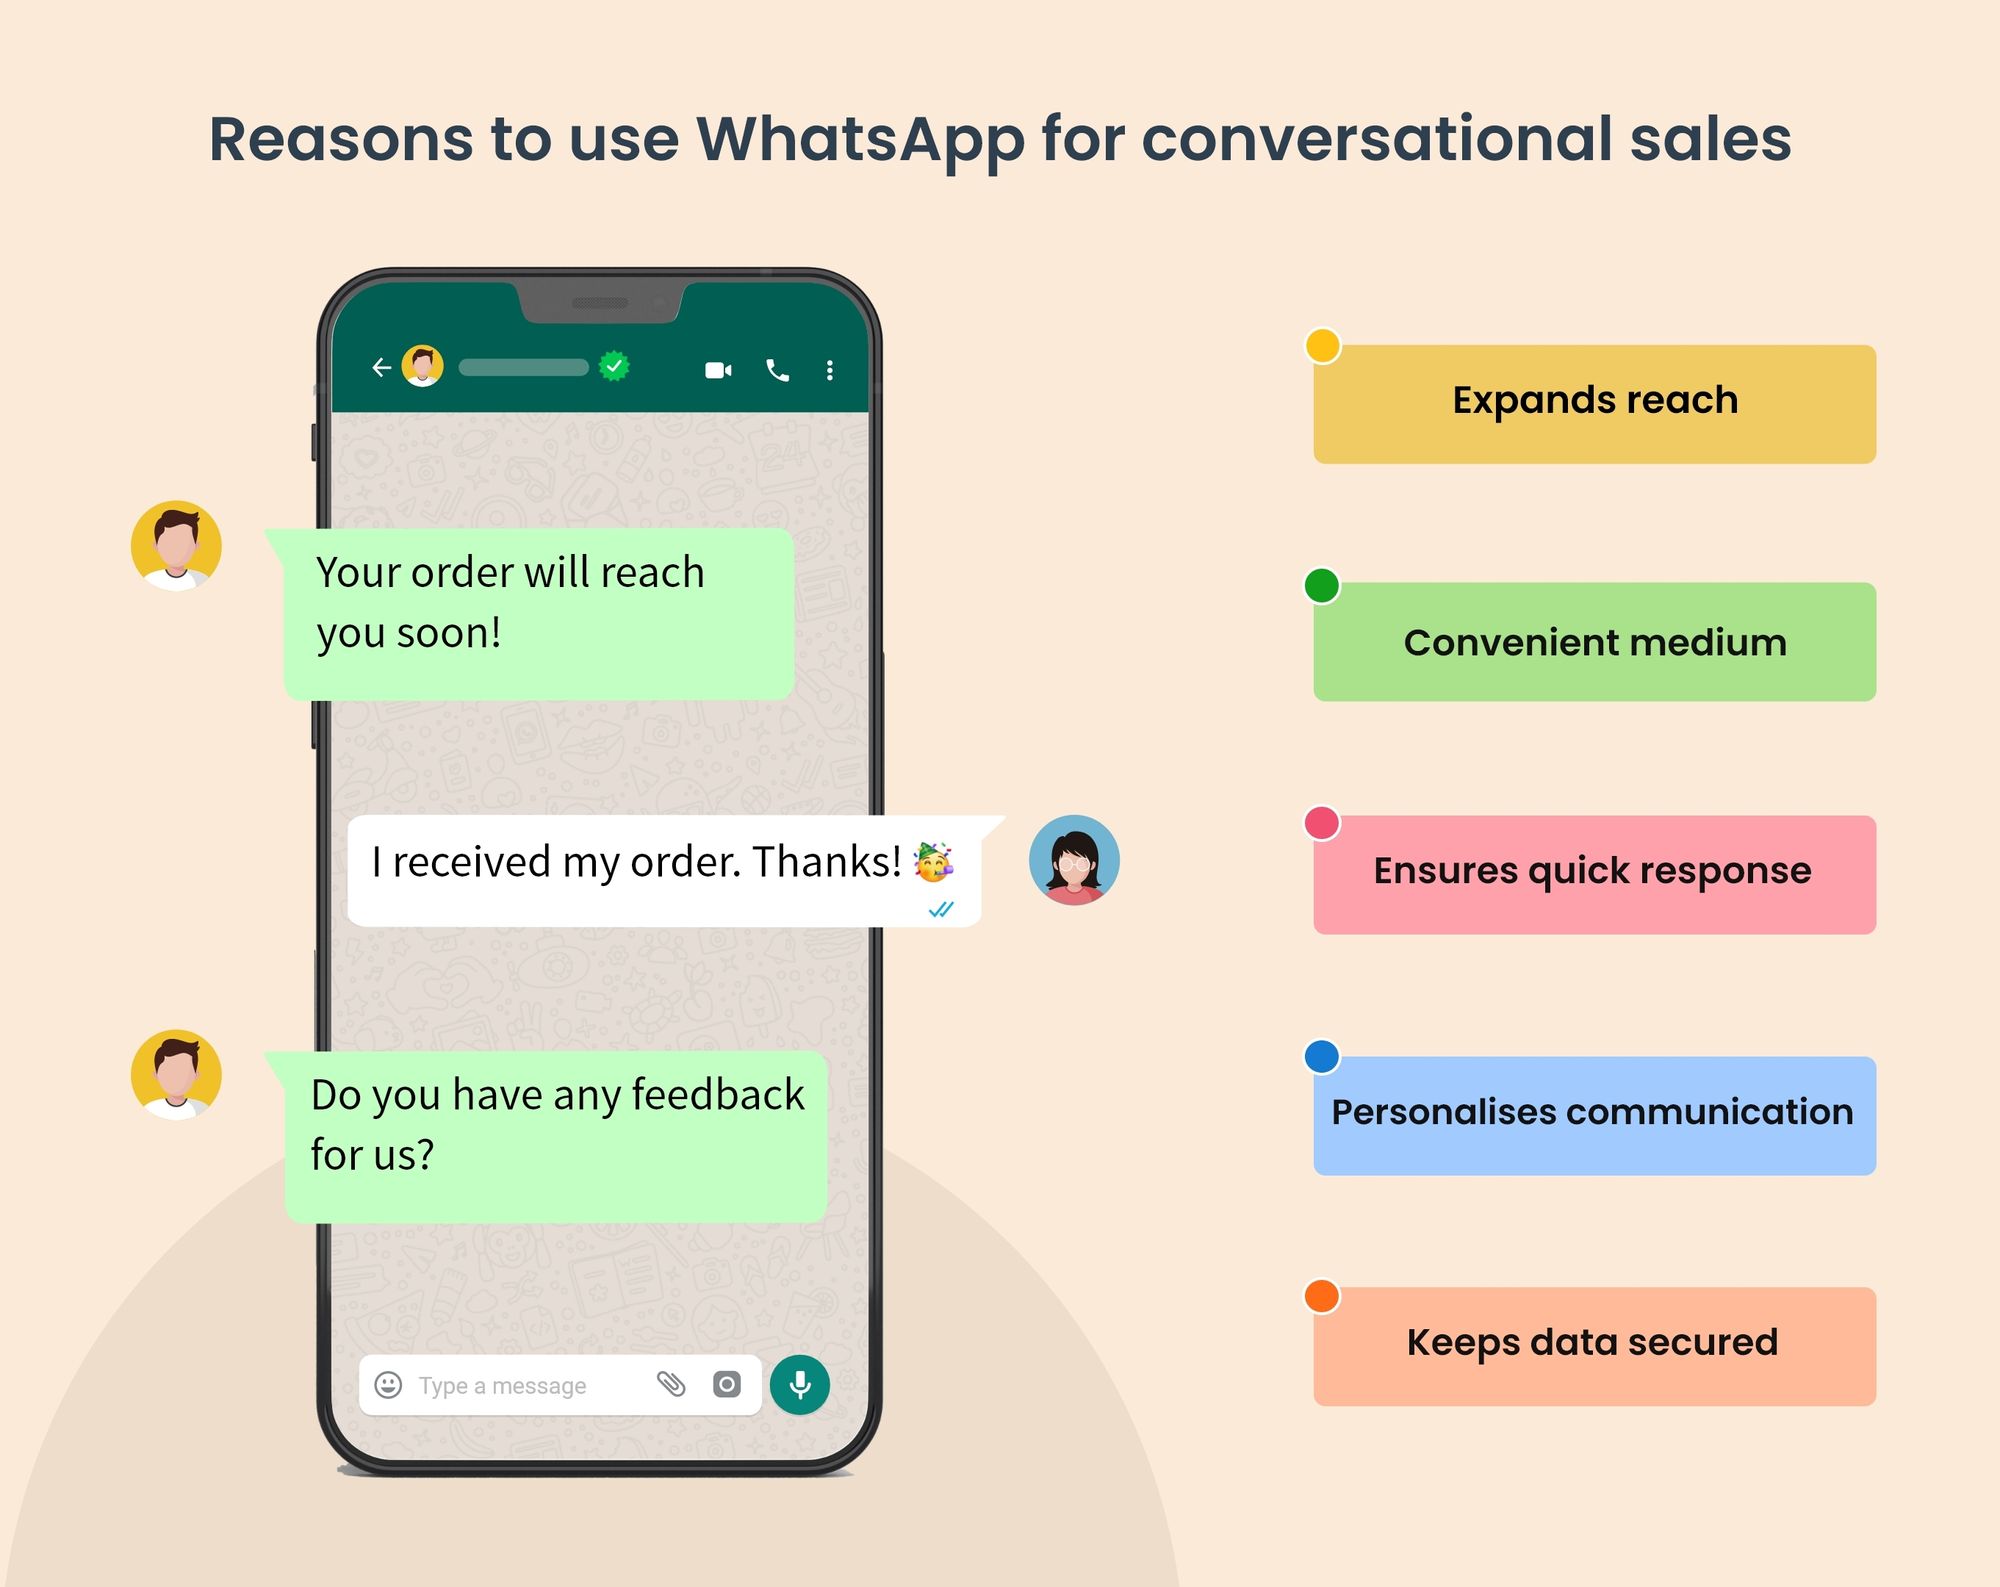 Benefits of using WhatsApp for conversational sales